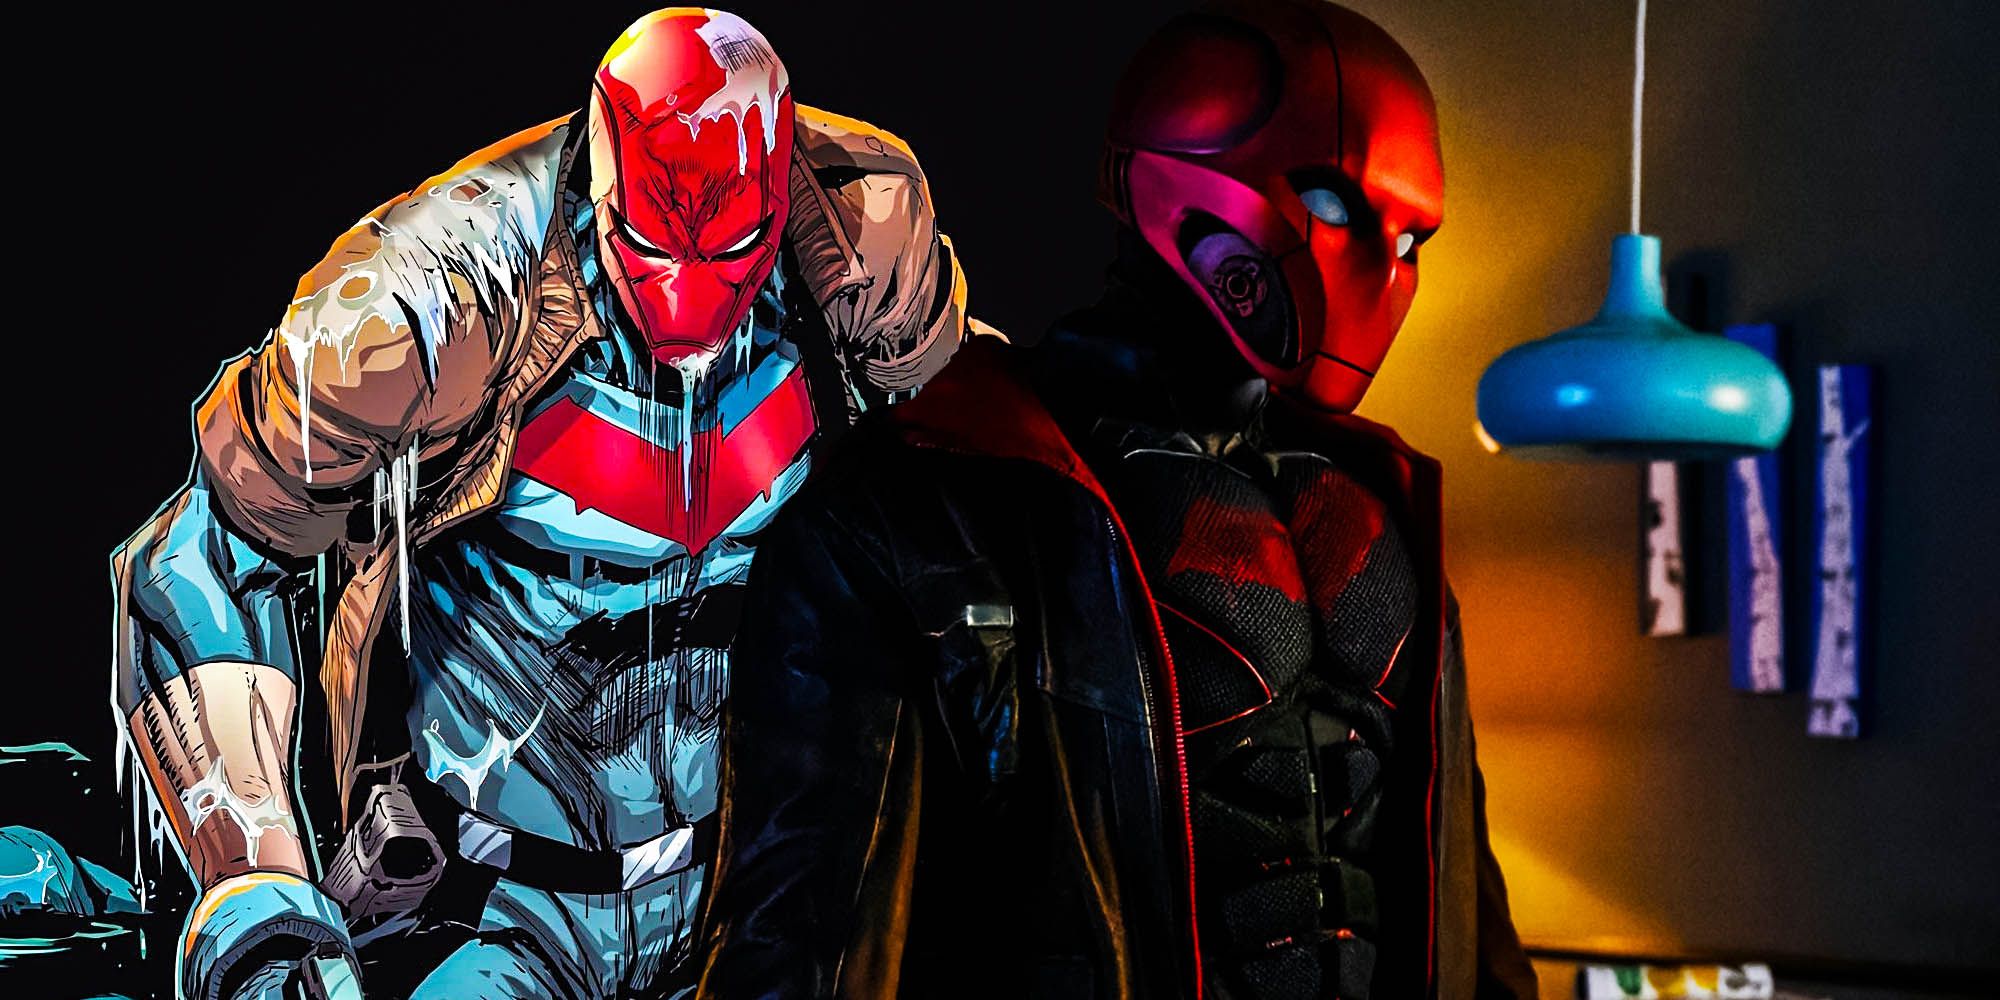 Titans Jason Todd’s Rebirth As Red Hood Was Way Darker In The Comics